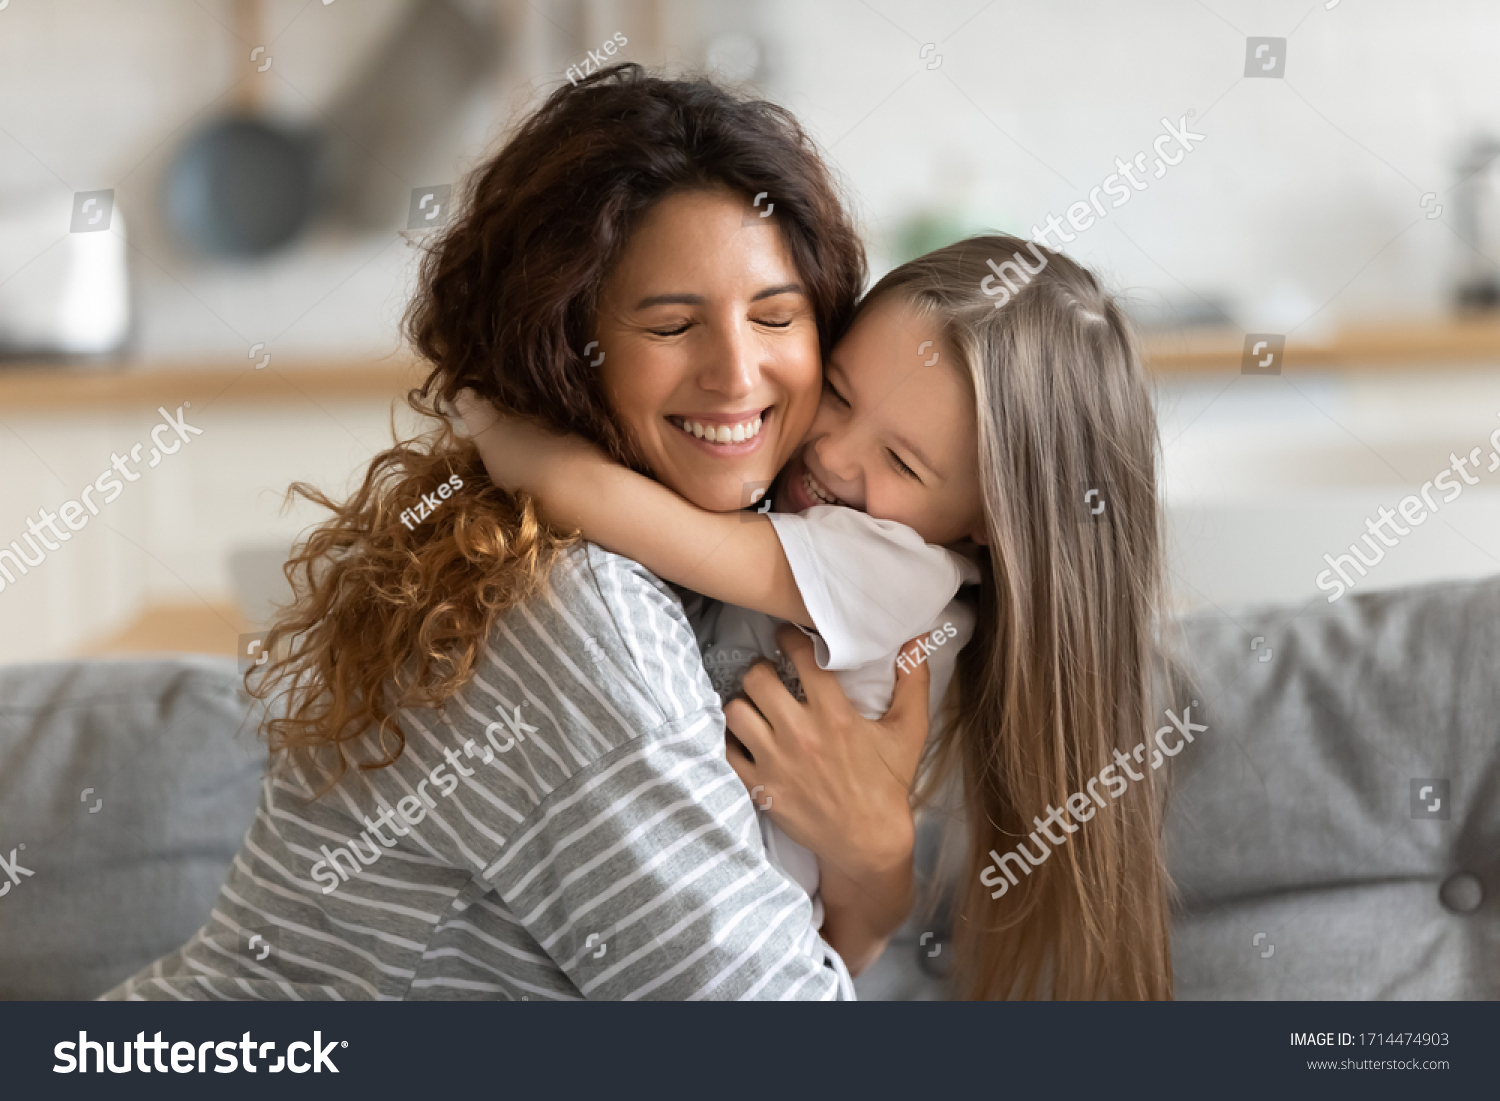 Affectionate beautiful young woman cuddling small preschool child daughter, feeling happiness. Cute little kid girl embracing loving mommy, feeling thankful, enjoying tender sweet time at home. #1714474903